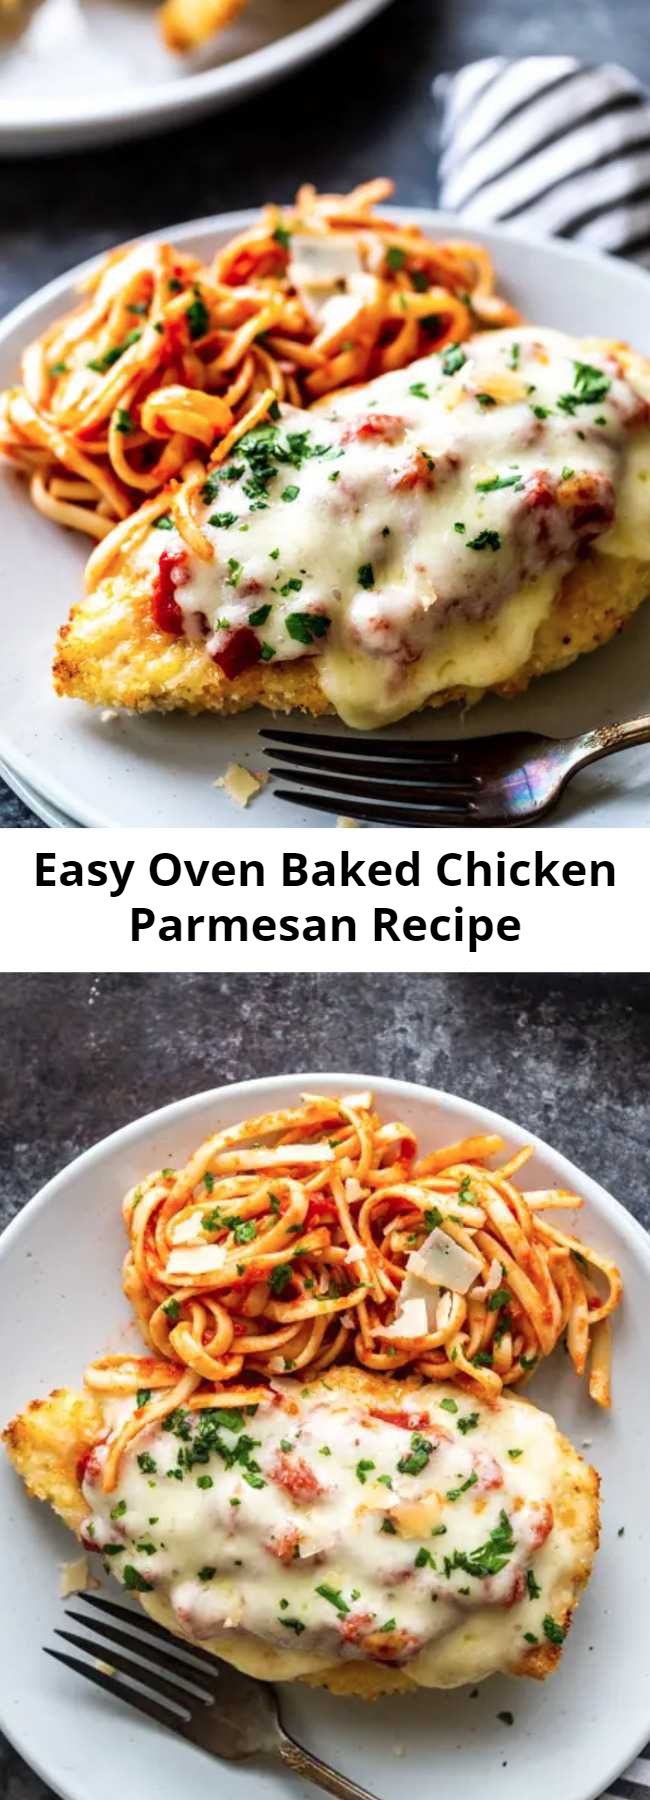 Easy Oven Baked Chicken Parmesan Recipe - This delicious Oven Baked Chicken Parmesan recipe is easy and doesn't require any frying. Because this chicken Parmesan is baked, it is healthy, quick and easy! Make this crispy baked Parmesan crusted chicken for dinner tonight in about thirty minutes!